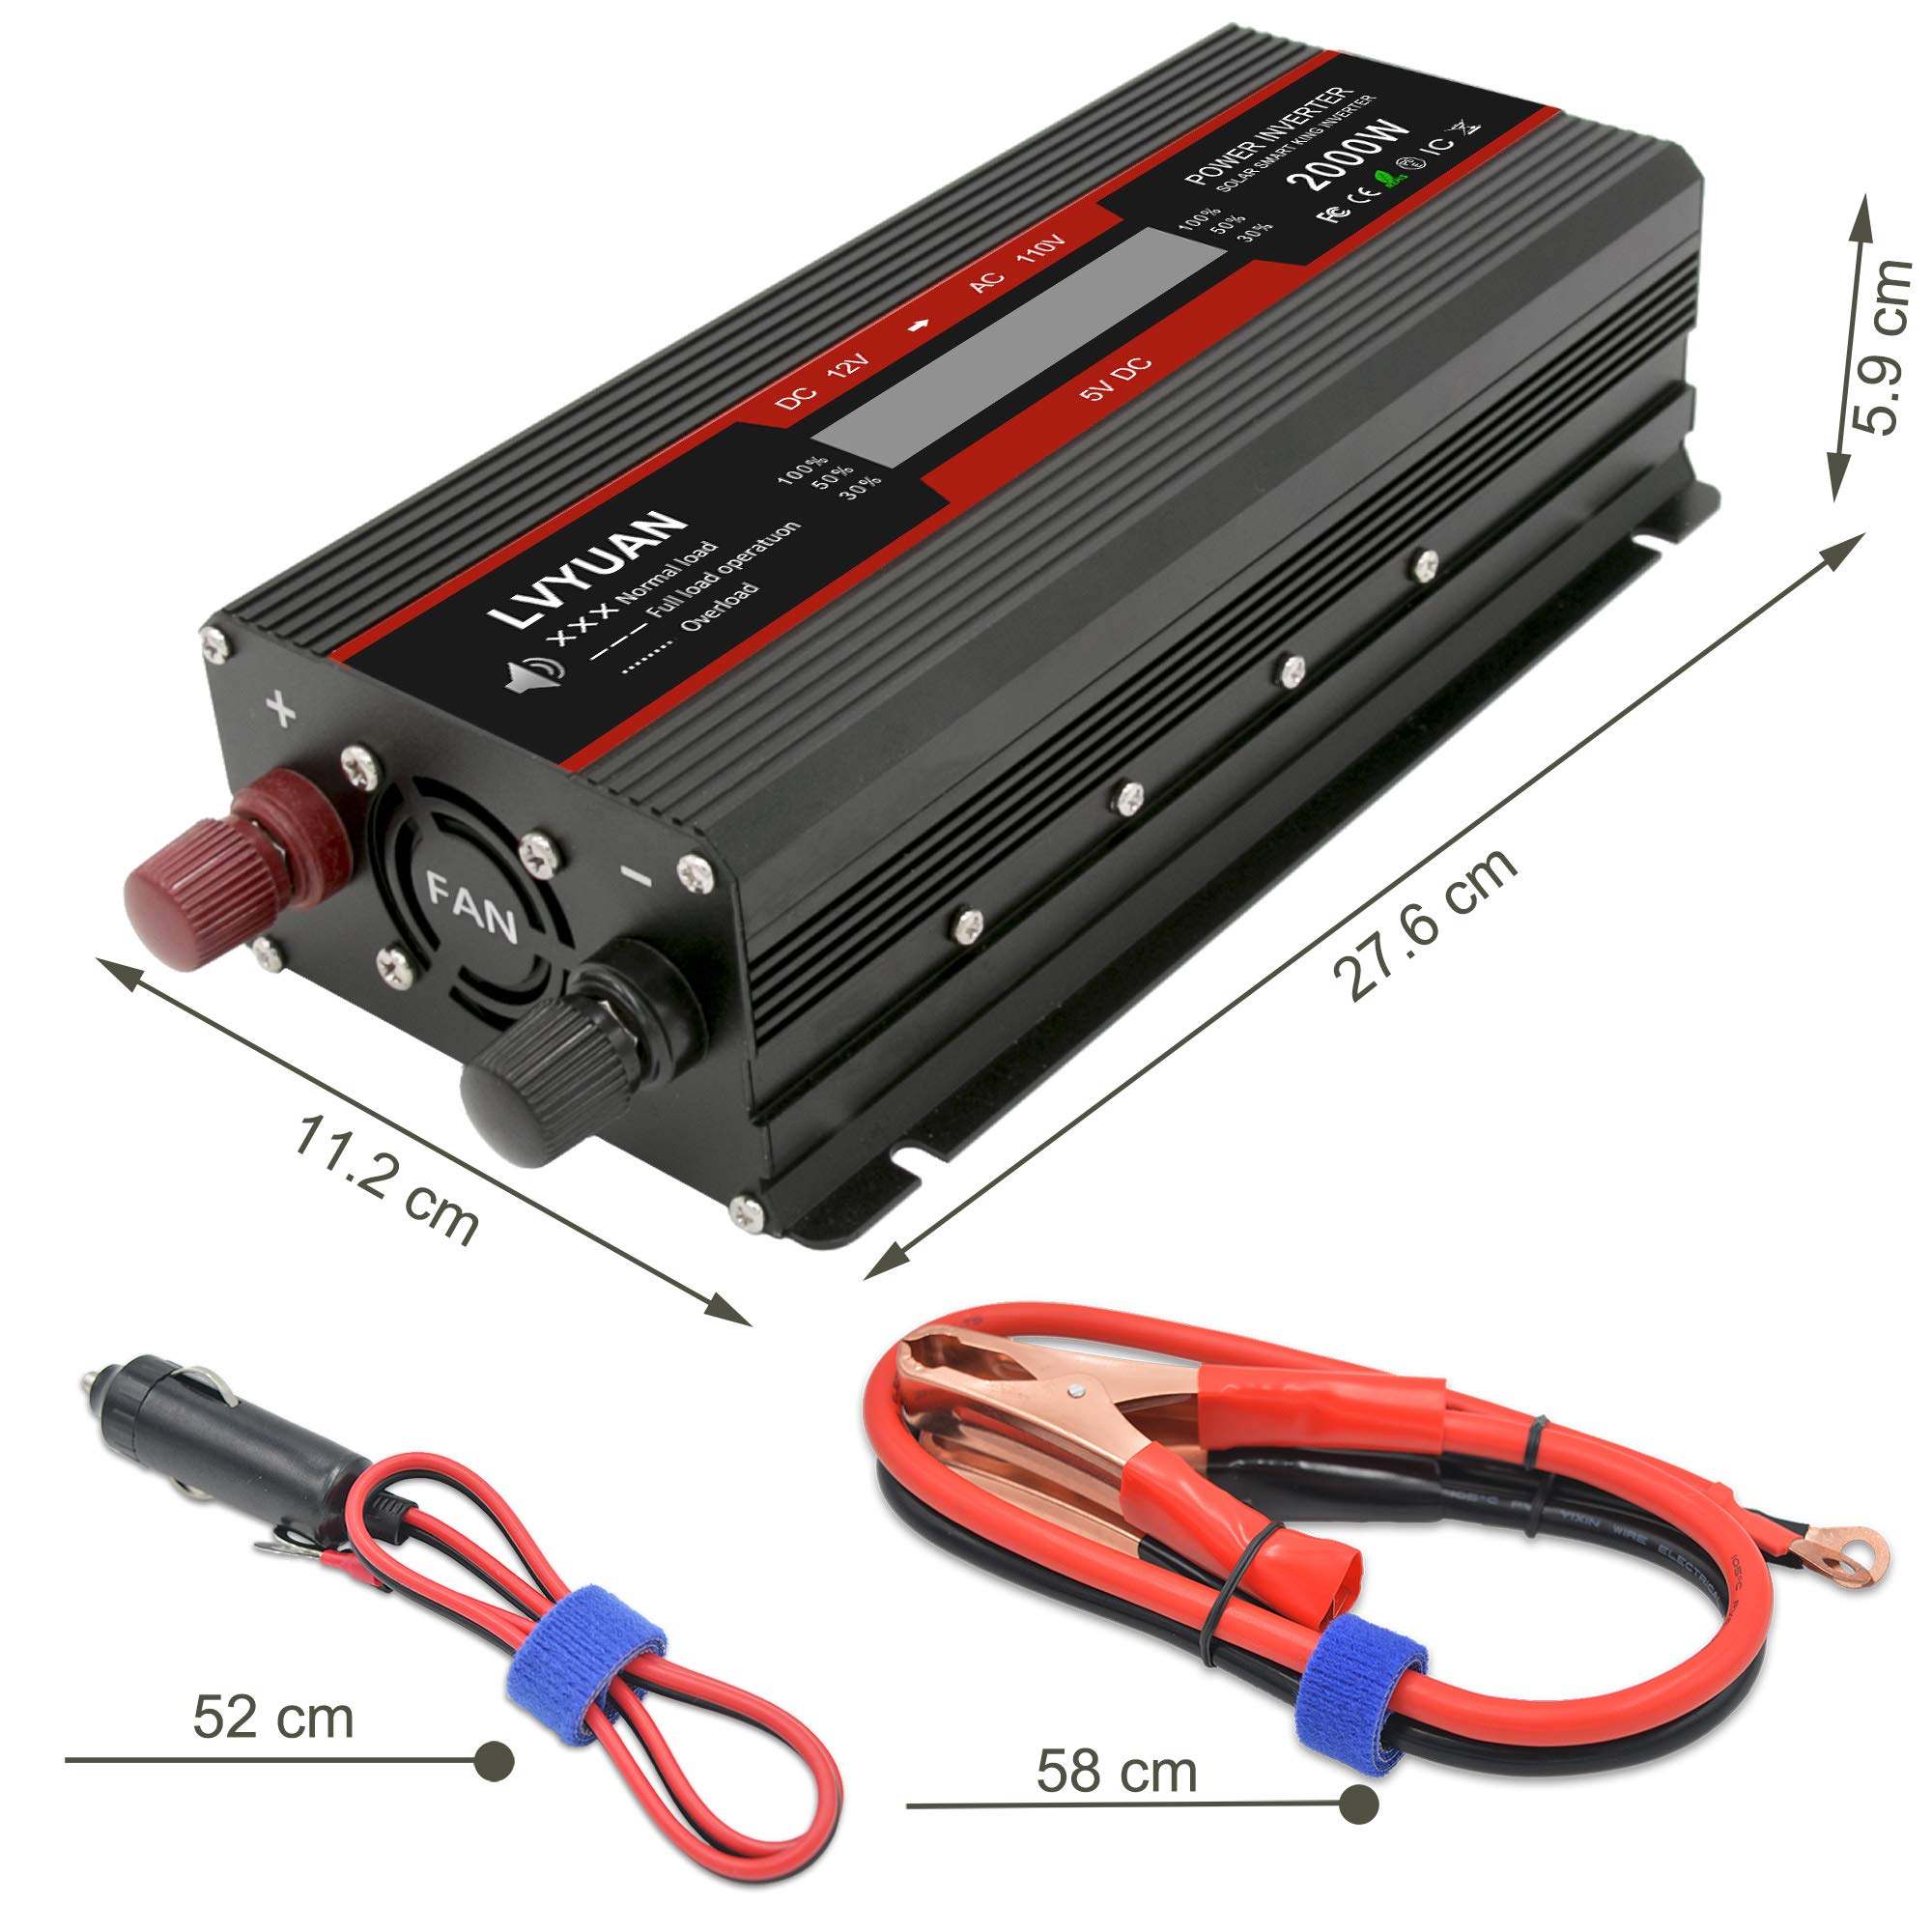 Mua Cantonape 1000W/2000W(Peak) Car Power Inverter DC 12V to 110V AC  Converter with LCD Display Dual AC Outlets and Dual USB Car Charger for Car  Home Laptop Truck trên Amazon Mỹ chính